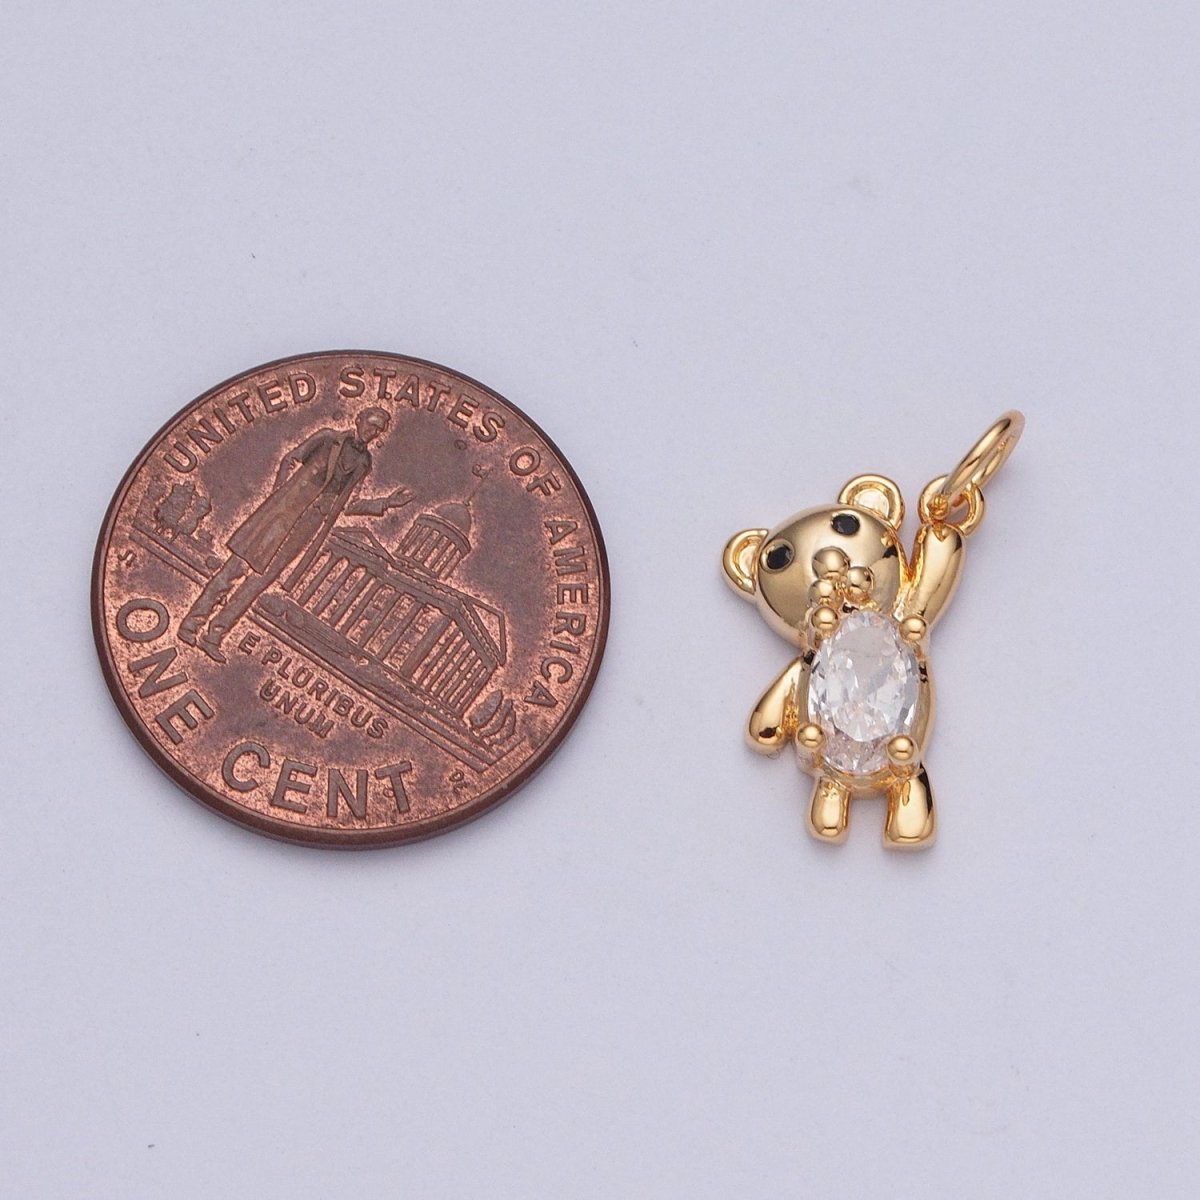 Gold Oval Clear CZ Teddy Bear Holding On Charm For DIY Jewelry Making | X-205 - DLUXCA